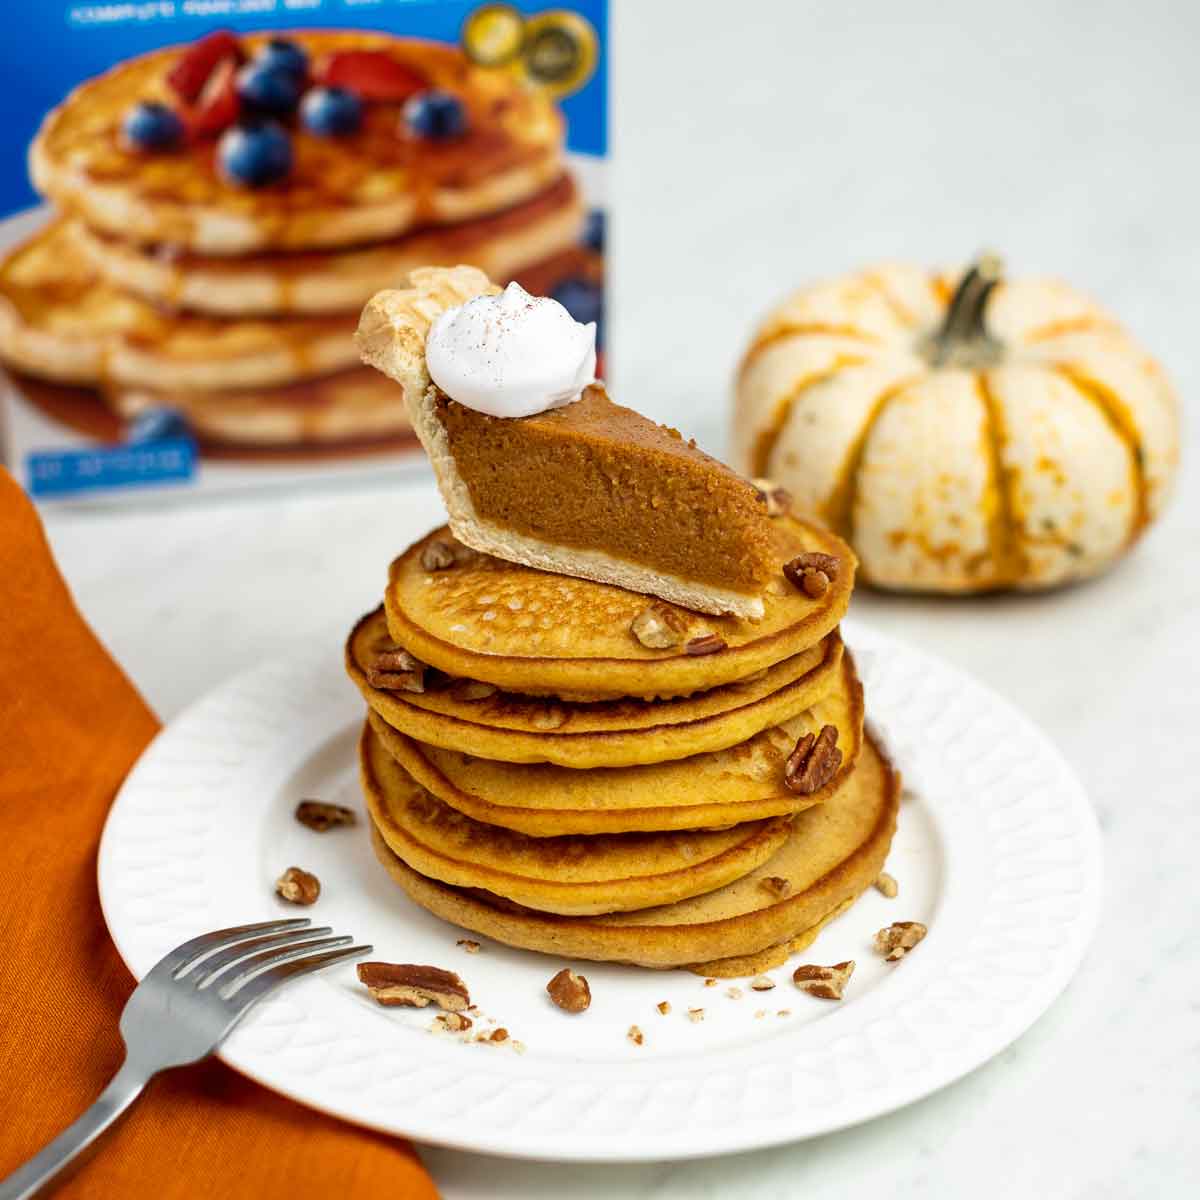 A stack of pancakes with a slice of pumpkin pie on top sits on a white plate.